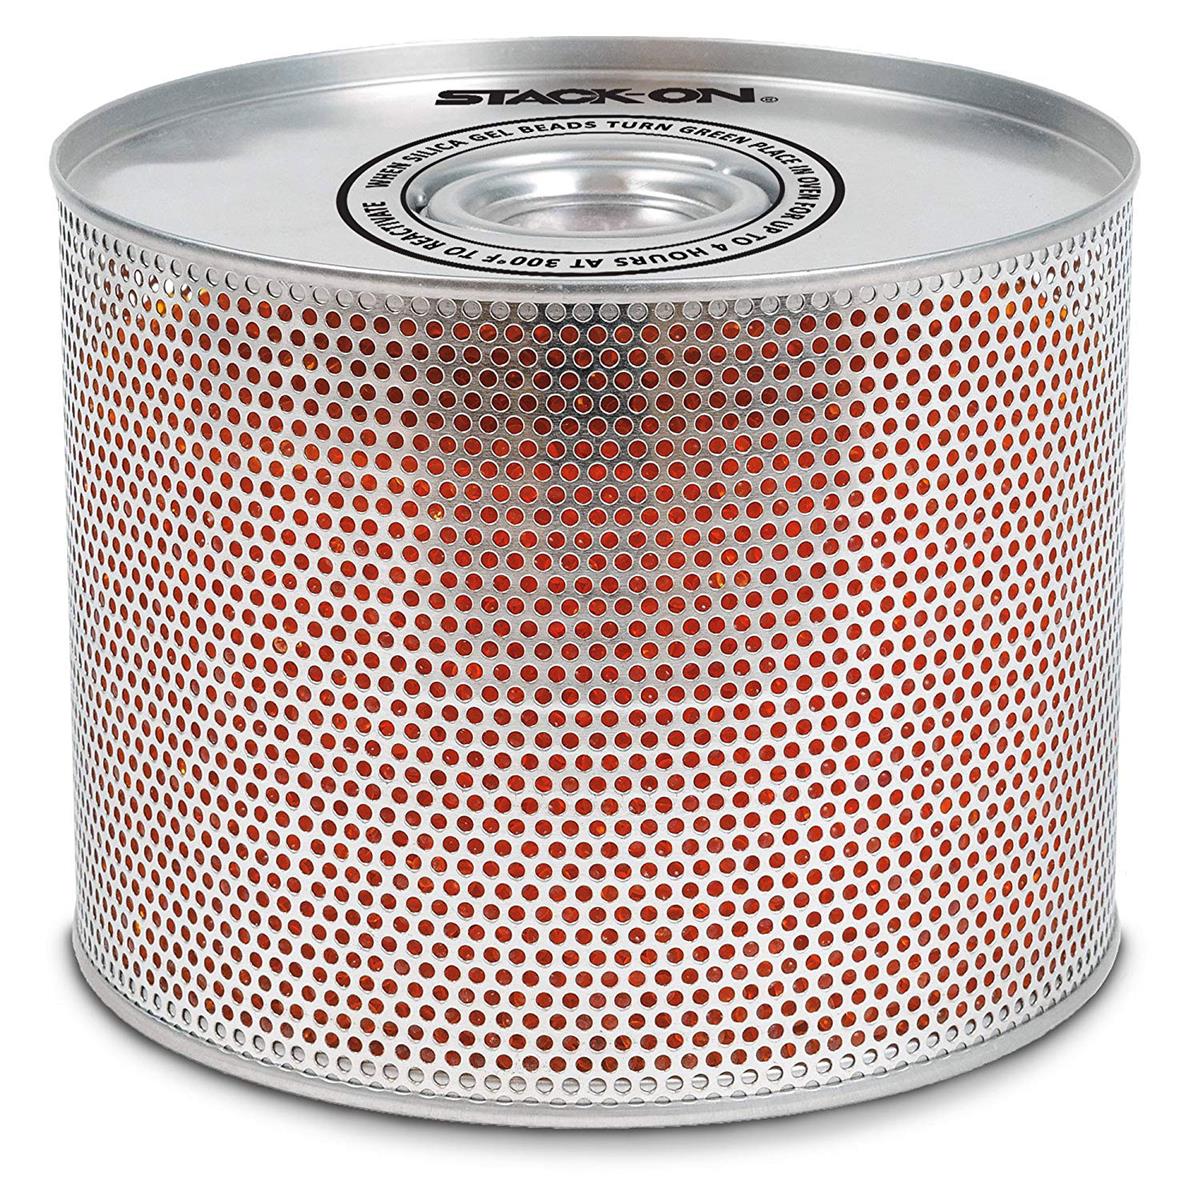 Image of Stack-On Rechargeable Moisture Control Canister